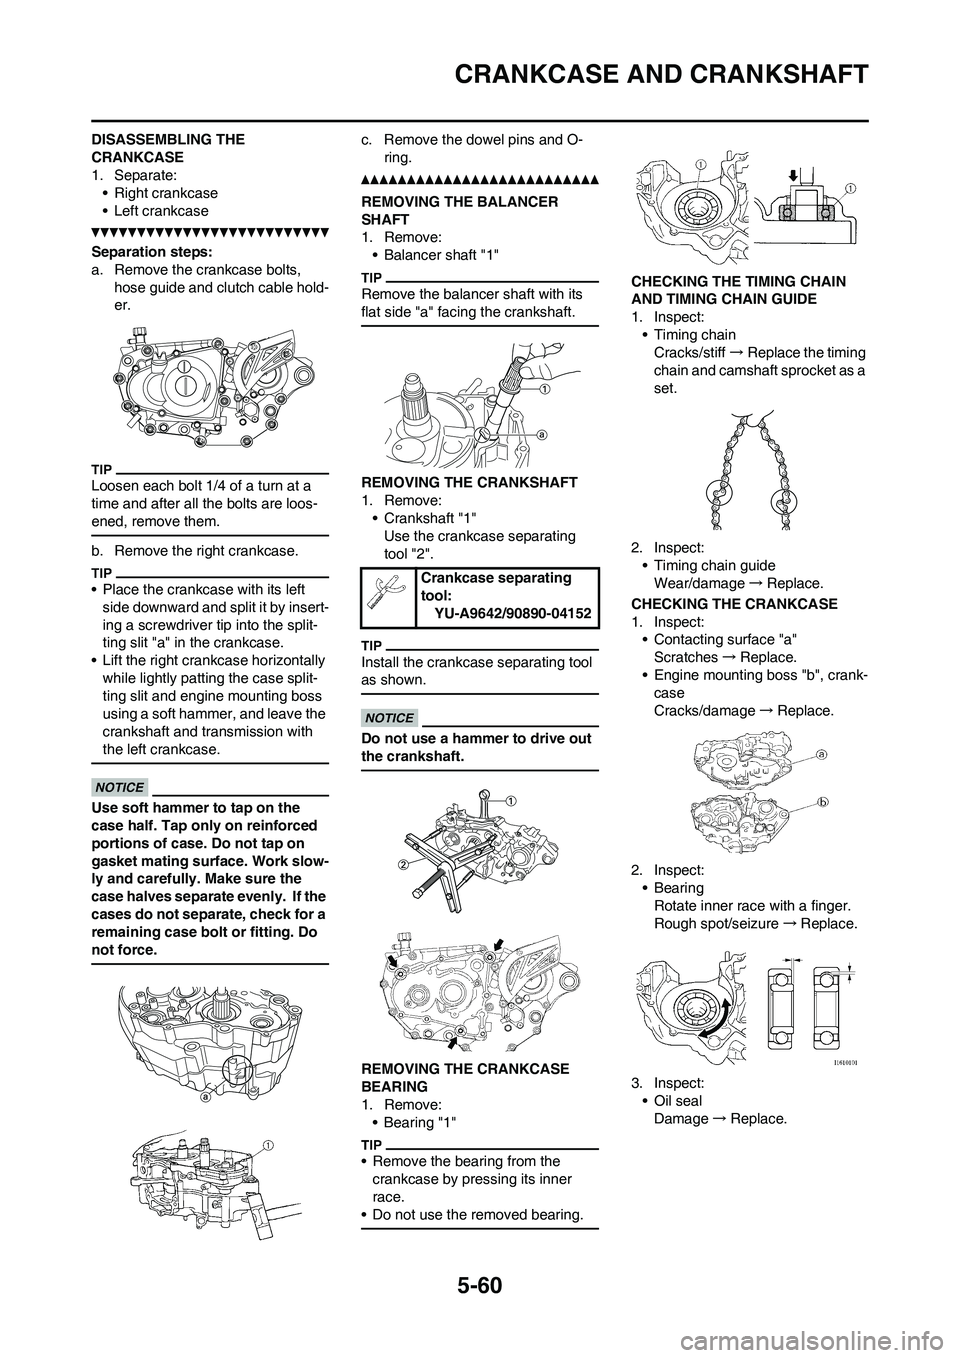 YAMAHA WR 450F 2011 Repair Manual 5-60
CRANKCASE AND CRANKSHAFT
DISASSEMBLING THE 
CRANKCASE
1. Separate:
• Right crankcase
• Left crankcase
Separation steps:
a. Remove the crankcase bolts, 
hose guide and clutch cable hold-
er.
L